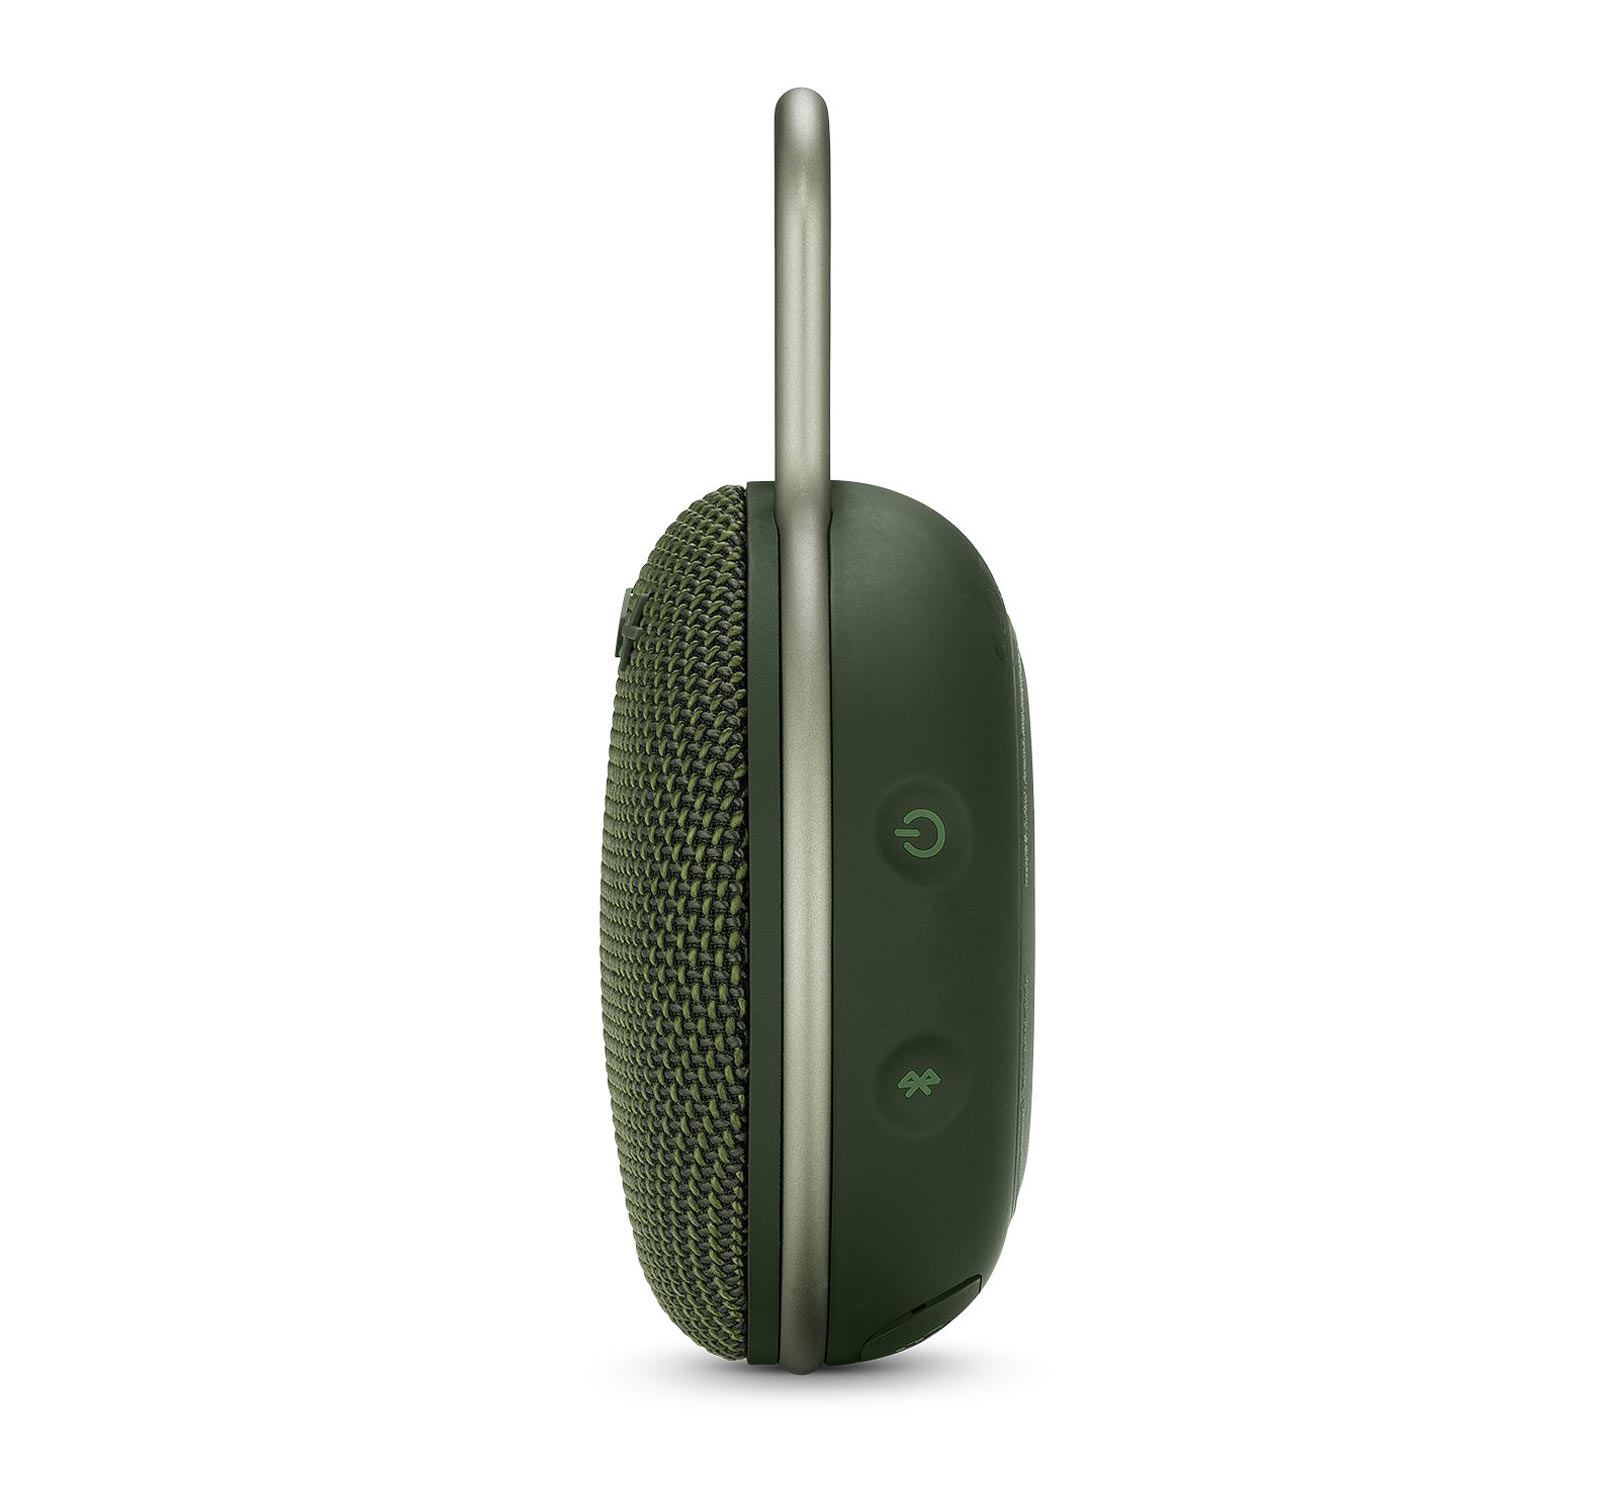 JBL Clip 3 Portable Bluetooth Speaker with Carabiner - Green - image 4 of 4